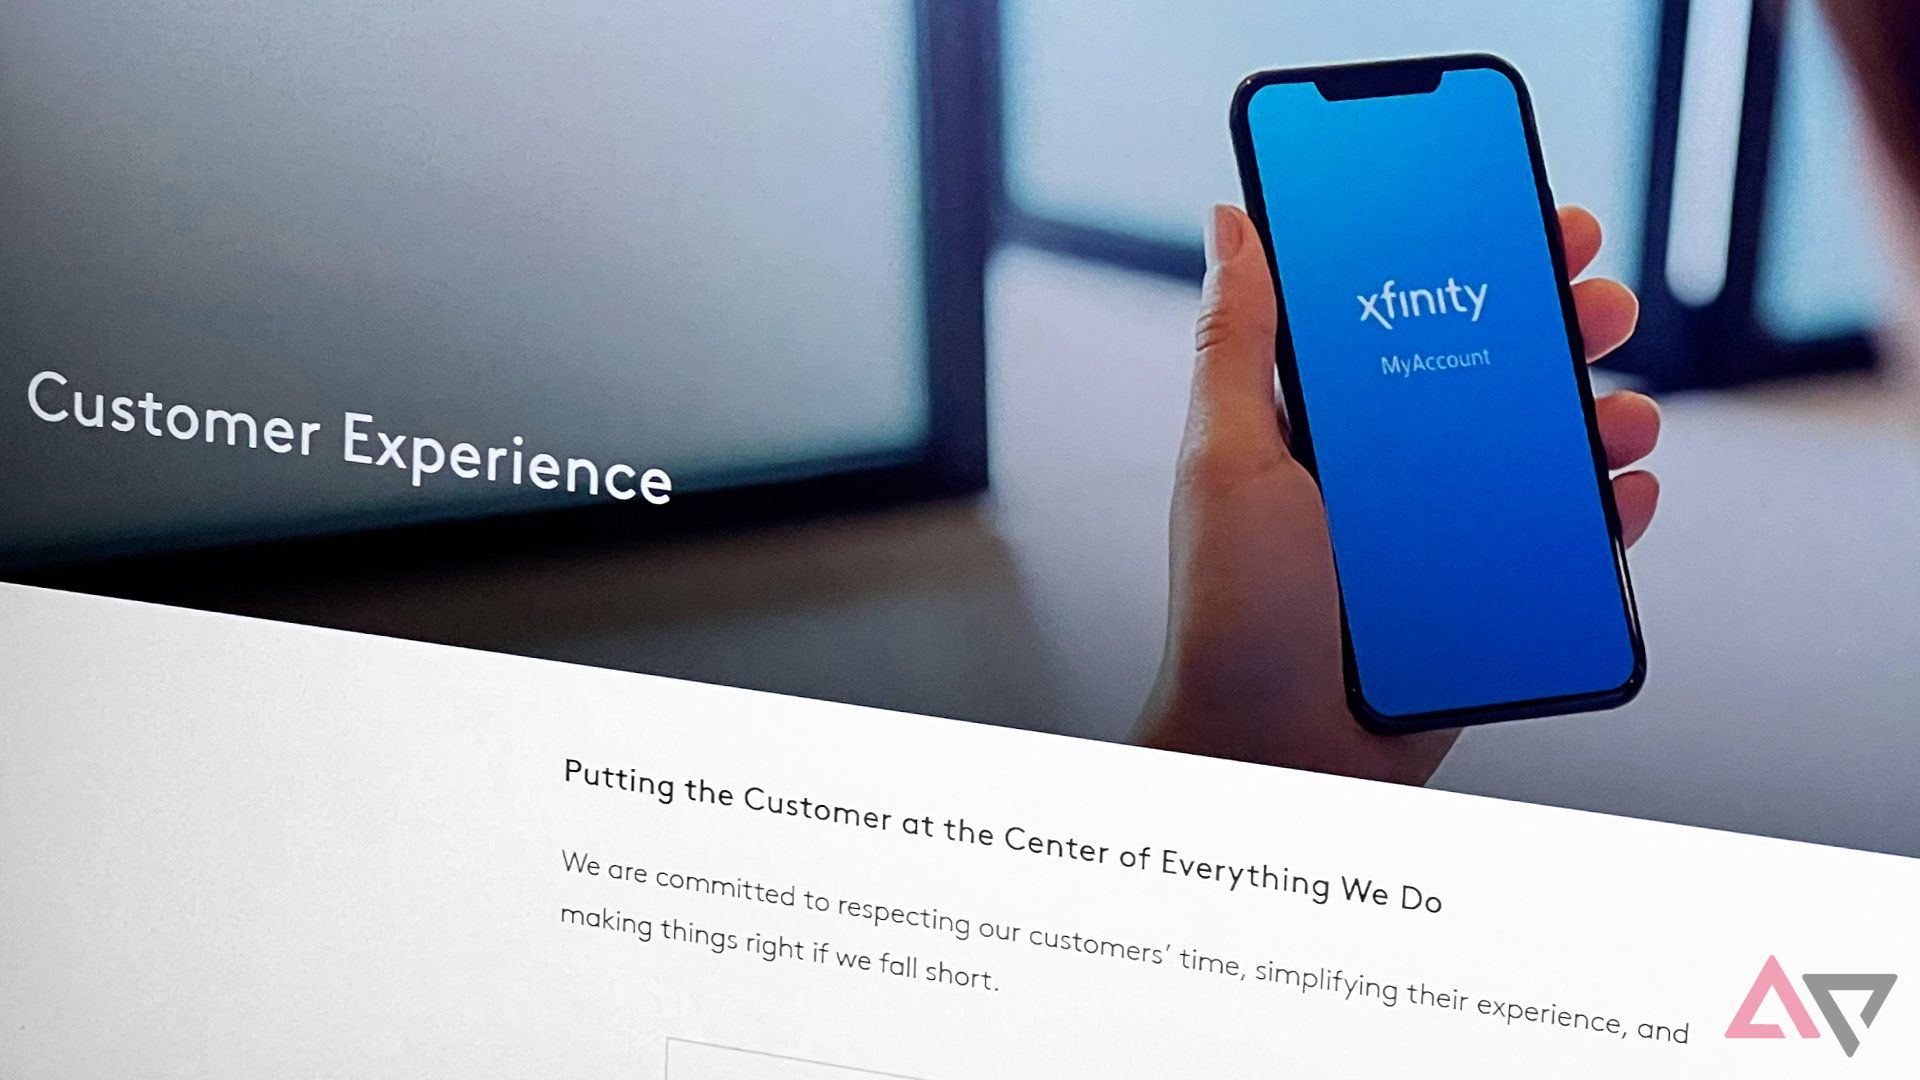 A photo of the Xfiniuty website, showing the Customer Experience page.